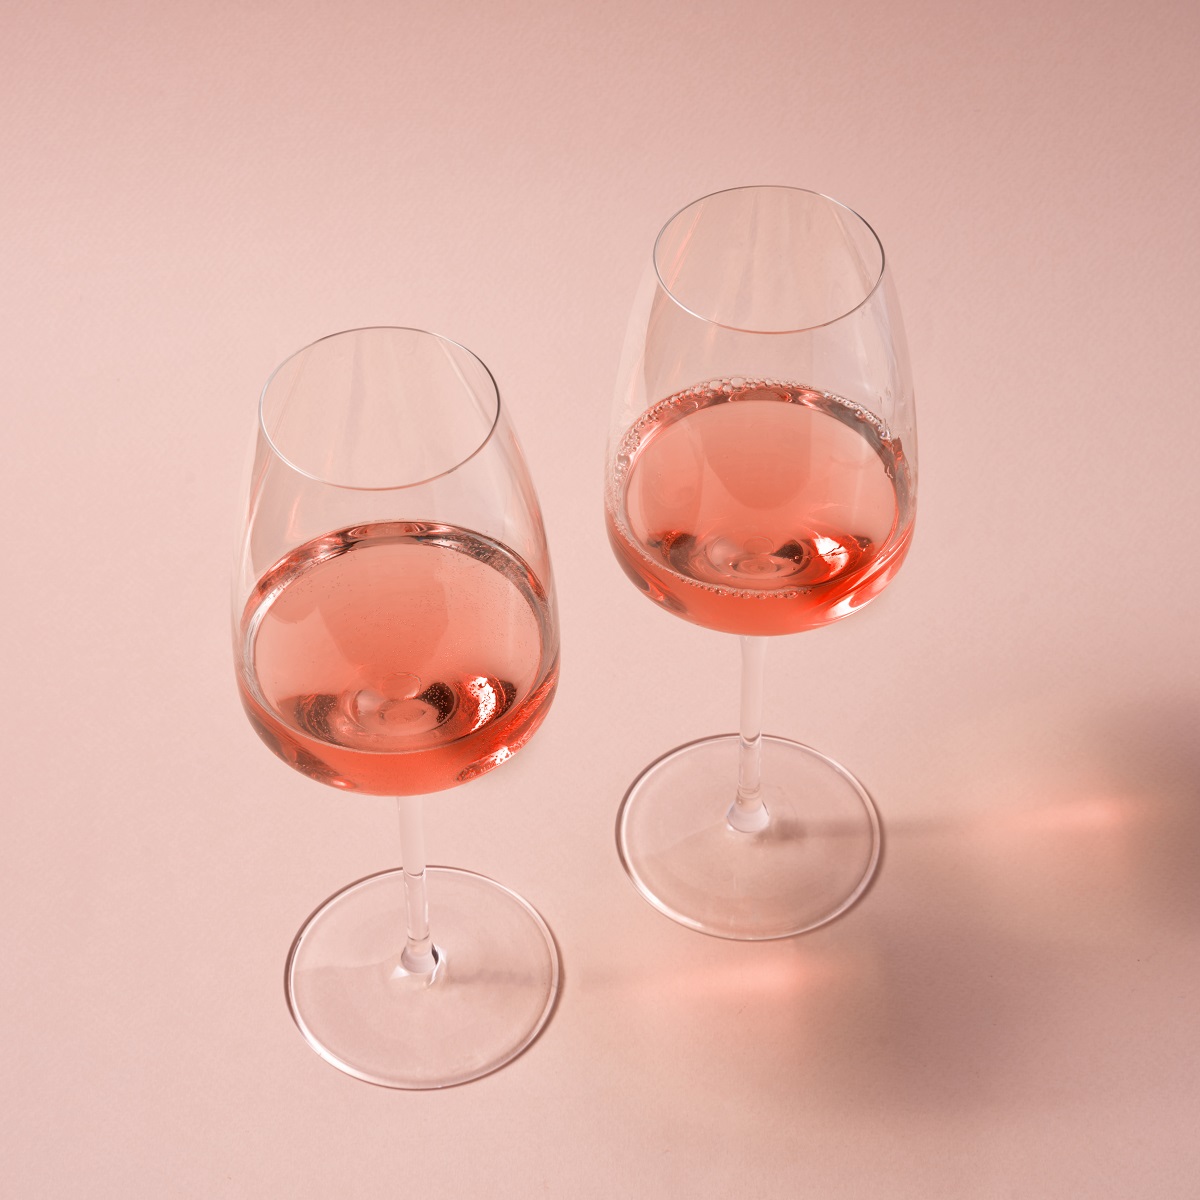 Glasses of rose wine in wineglasses on pink background.